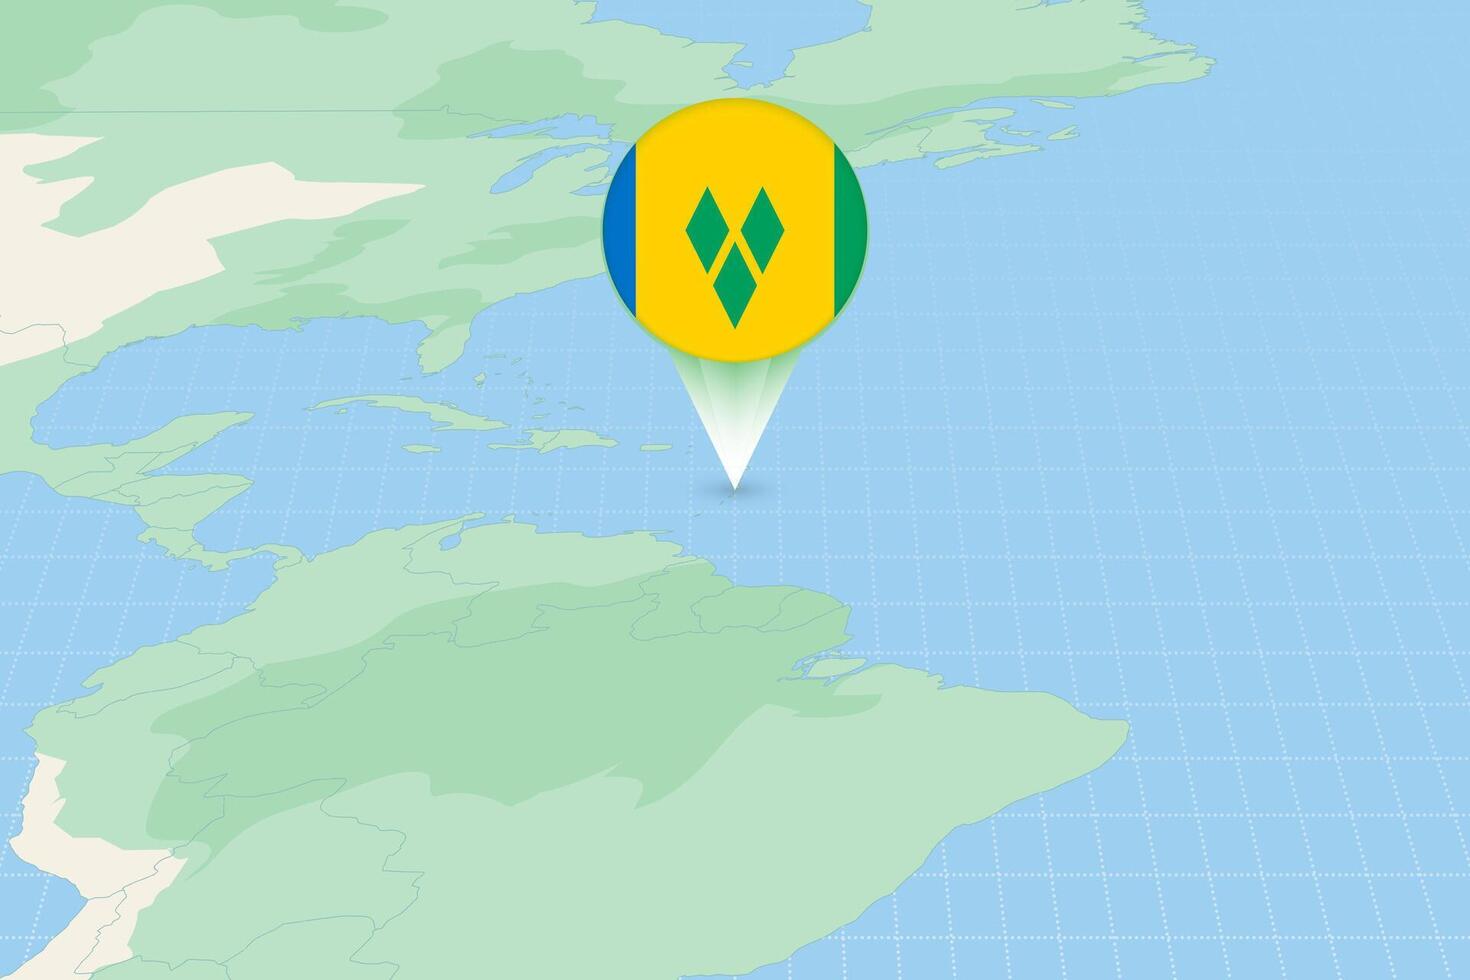 Map illustration of Saint Vincent and the Grenadines with the flag. Cartographic illustration of Saint Vincent and the Grenadines and neighboring countries. vector